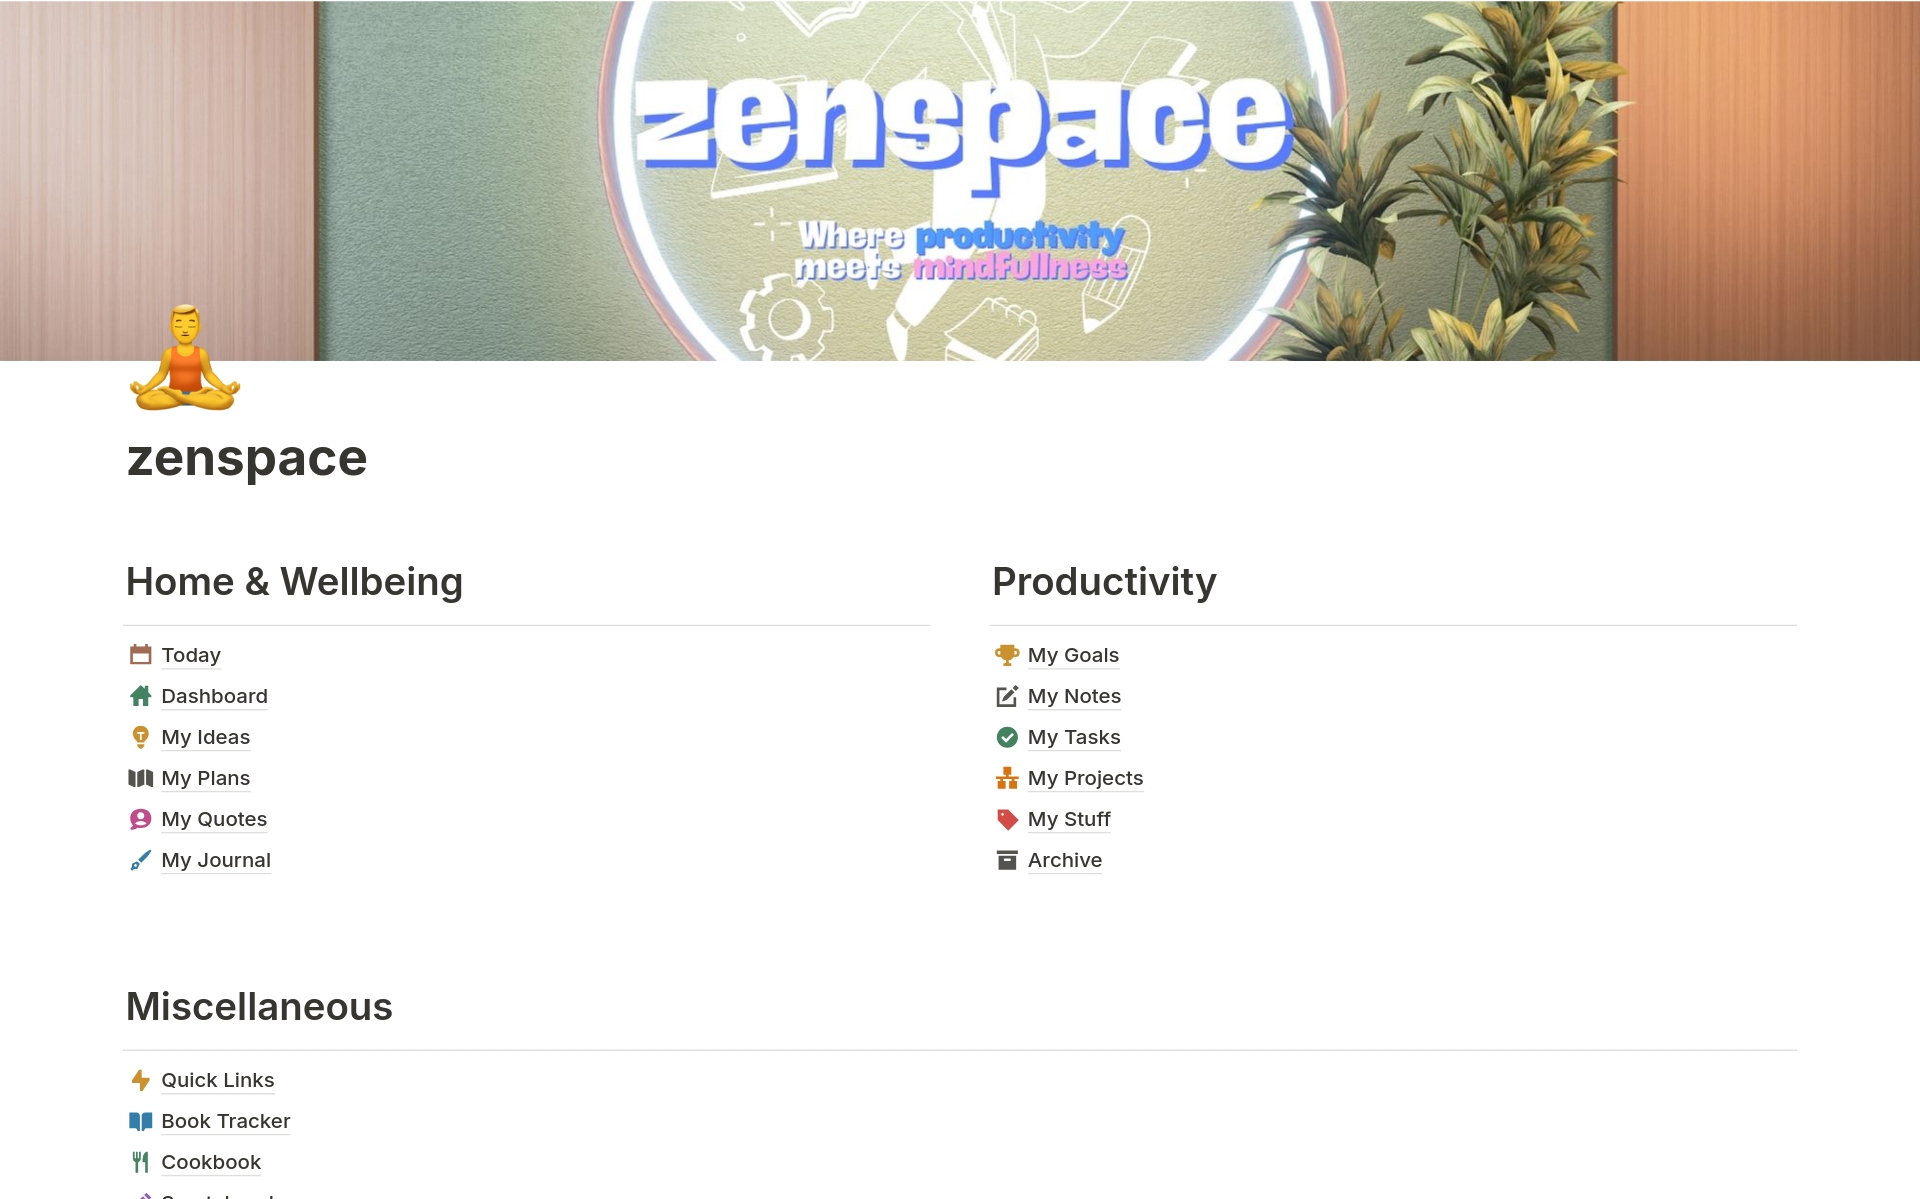 zenspace is your sanctuary for seamless productivity intertwined with mindfulness. Designed to harmonize your workload with your well-being, it features organized task management, serene journaling spaces, and reminders for mindfulness.